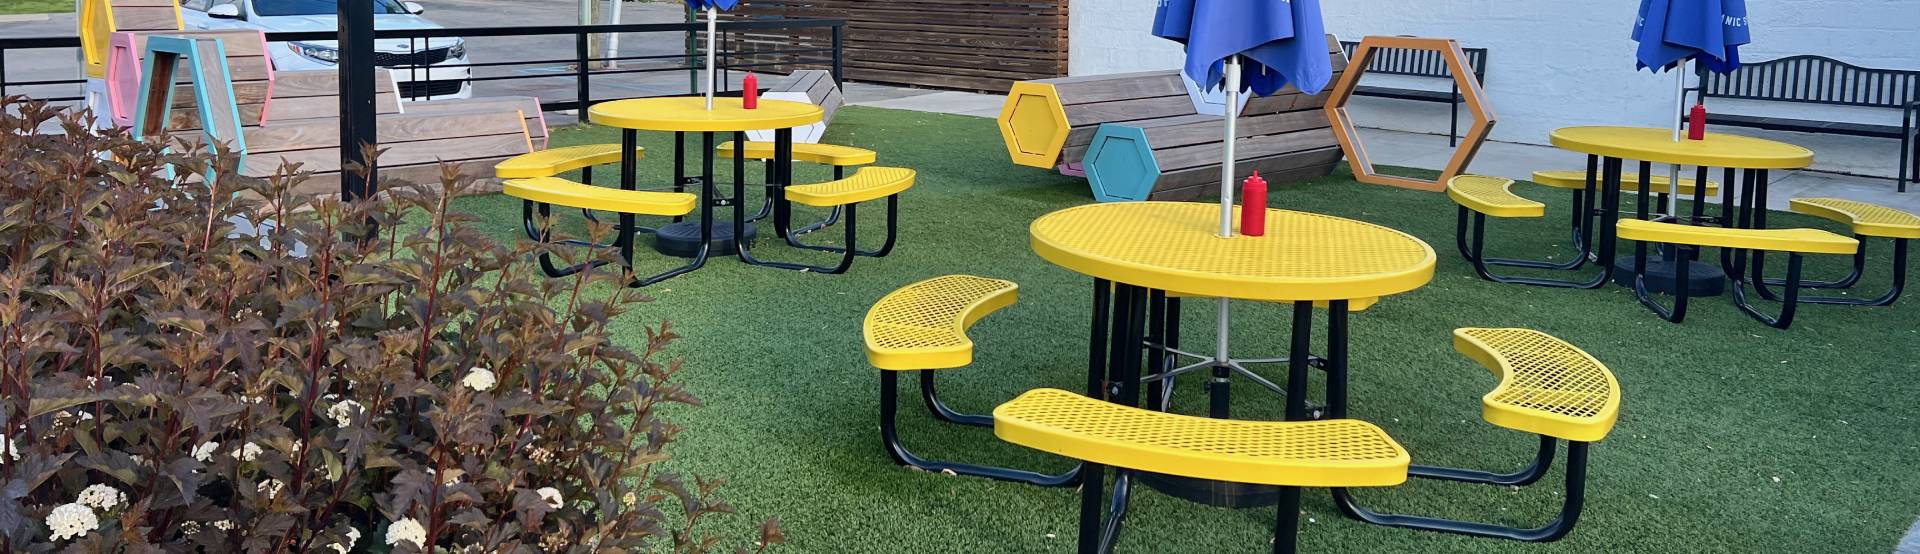 Artificial Grass Patio at Baby's Restaurant